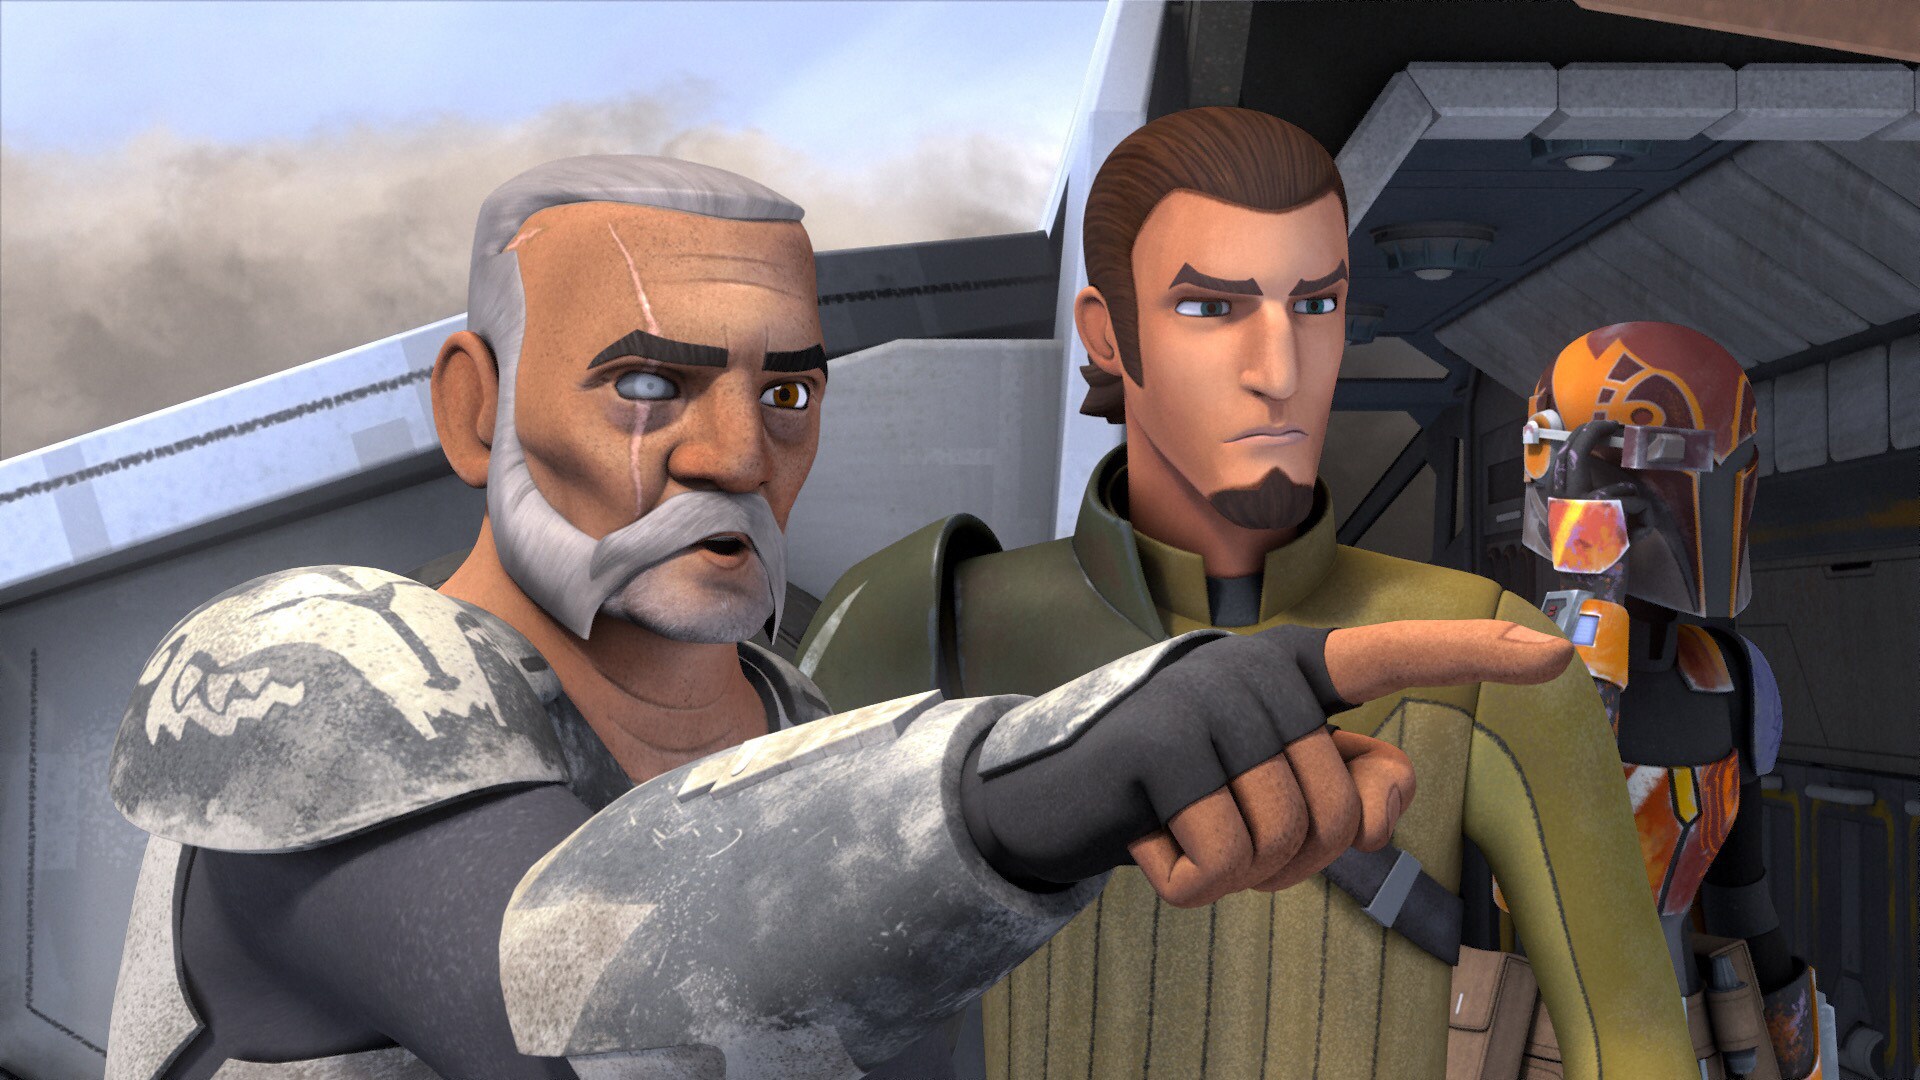 But the battle is just beginning. Zeb hears a rhythmic booming, and it's coming closer. Wolffe sp...